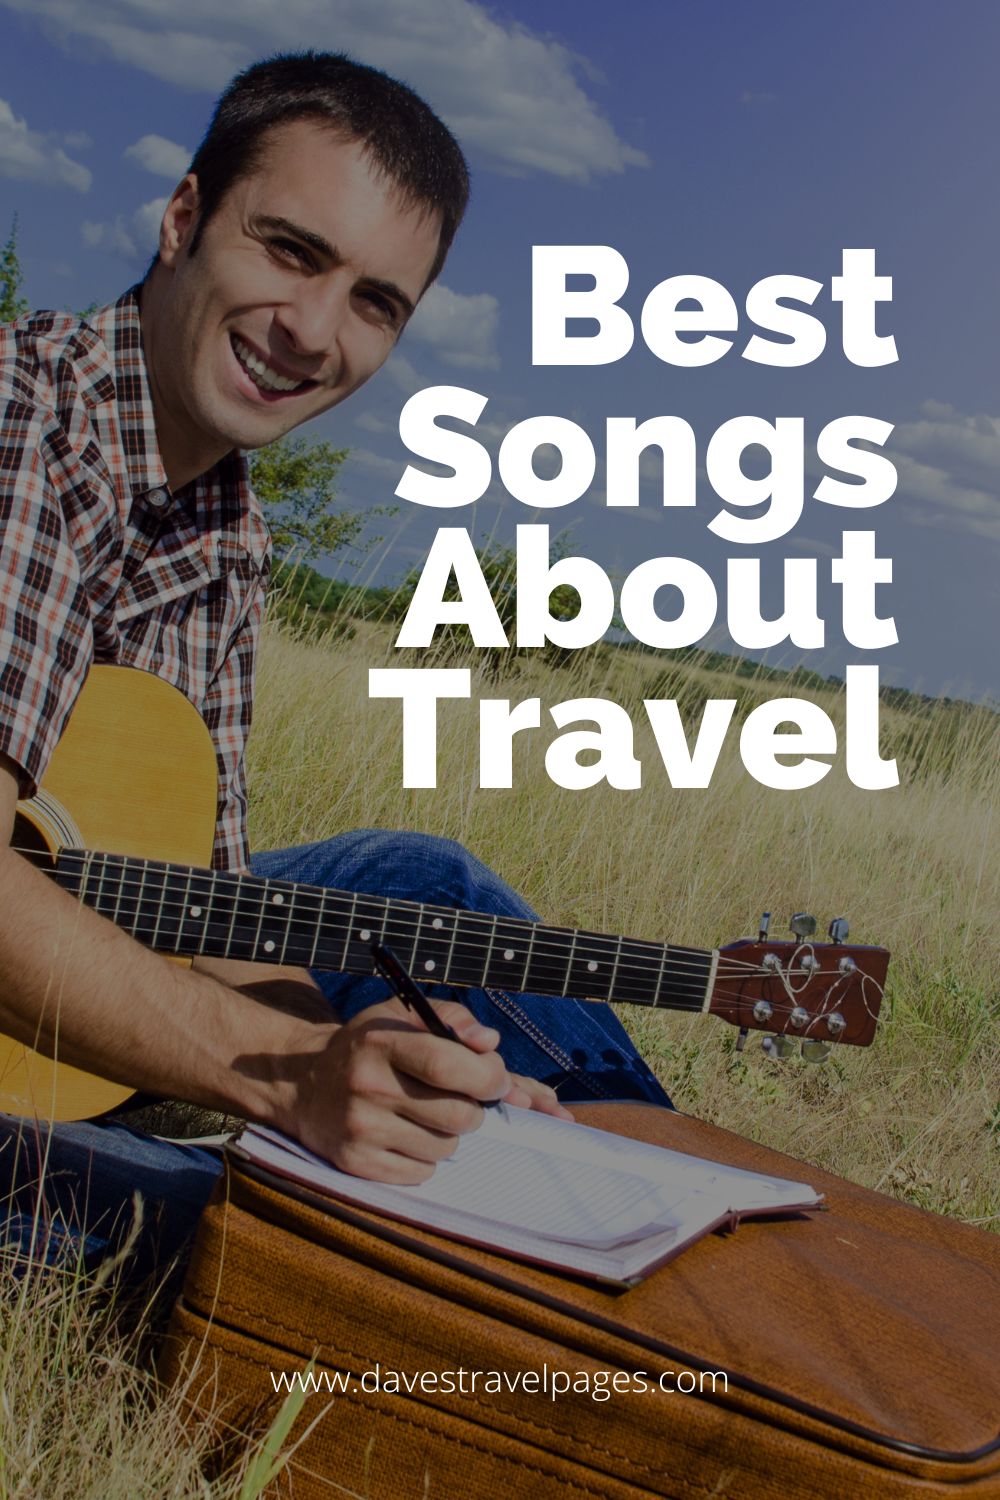 songs for travel videos 2022